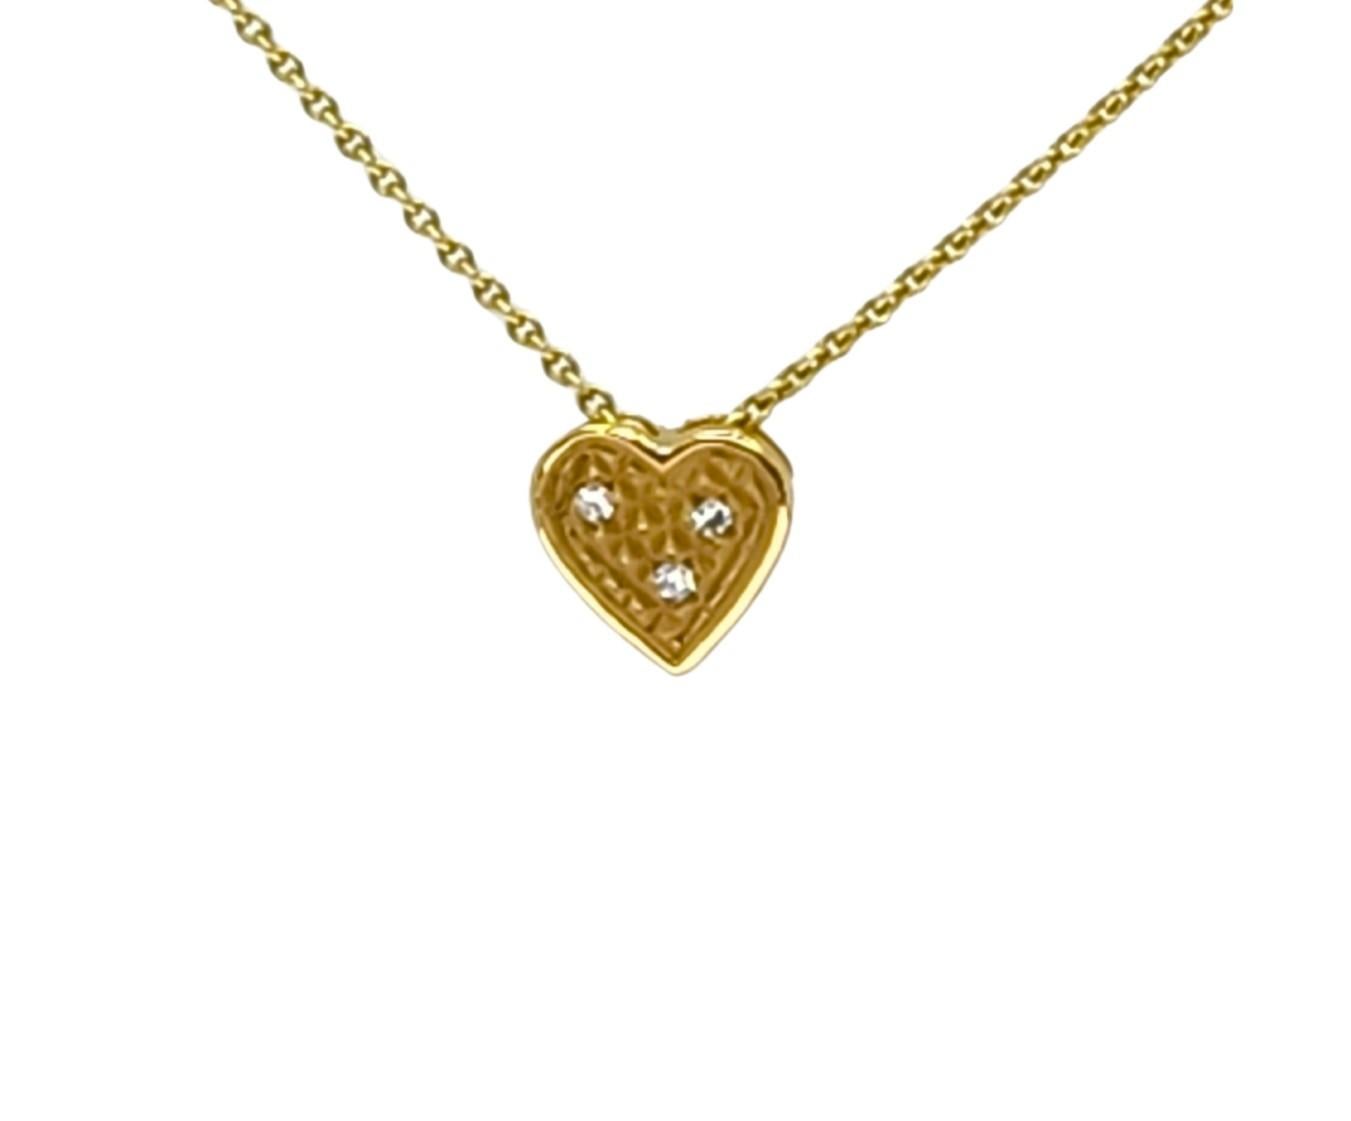 The yellow 18K Gold version of the Heart Slide with the unique Pyramid texture in matte and white diamonds will add a surprise sparkle play. 18K yellow gold adds another dimension in color play to the Heart Slide Necklace. 
The heart slides can be